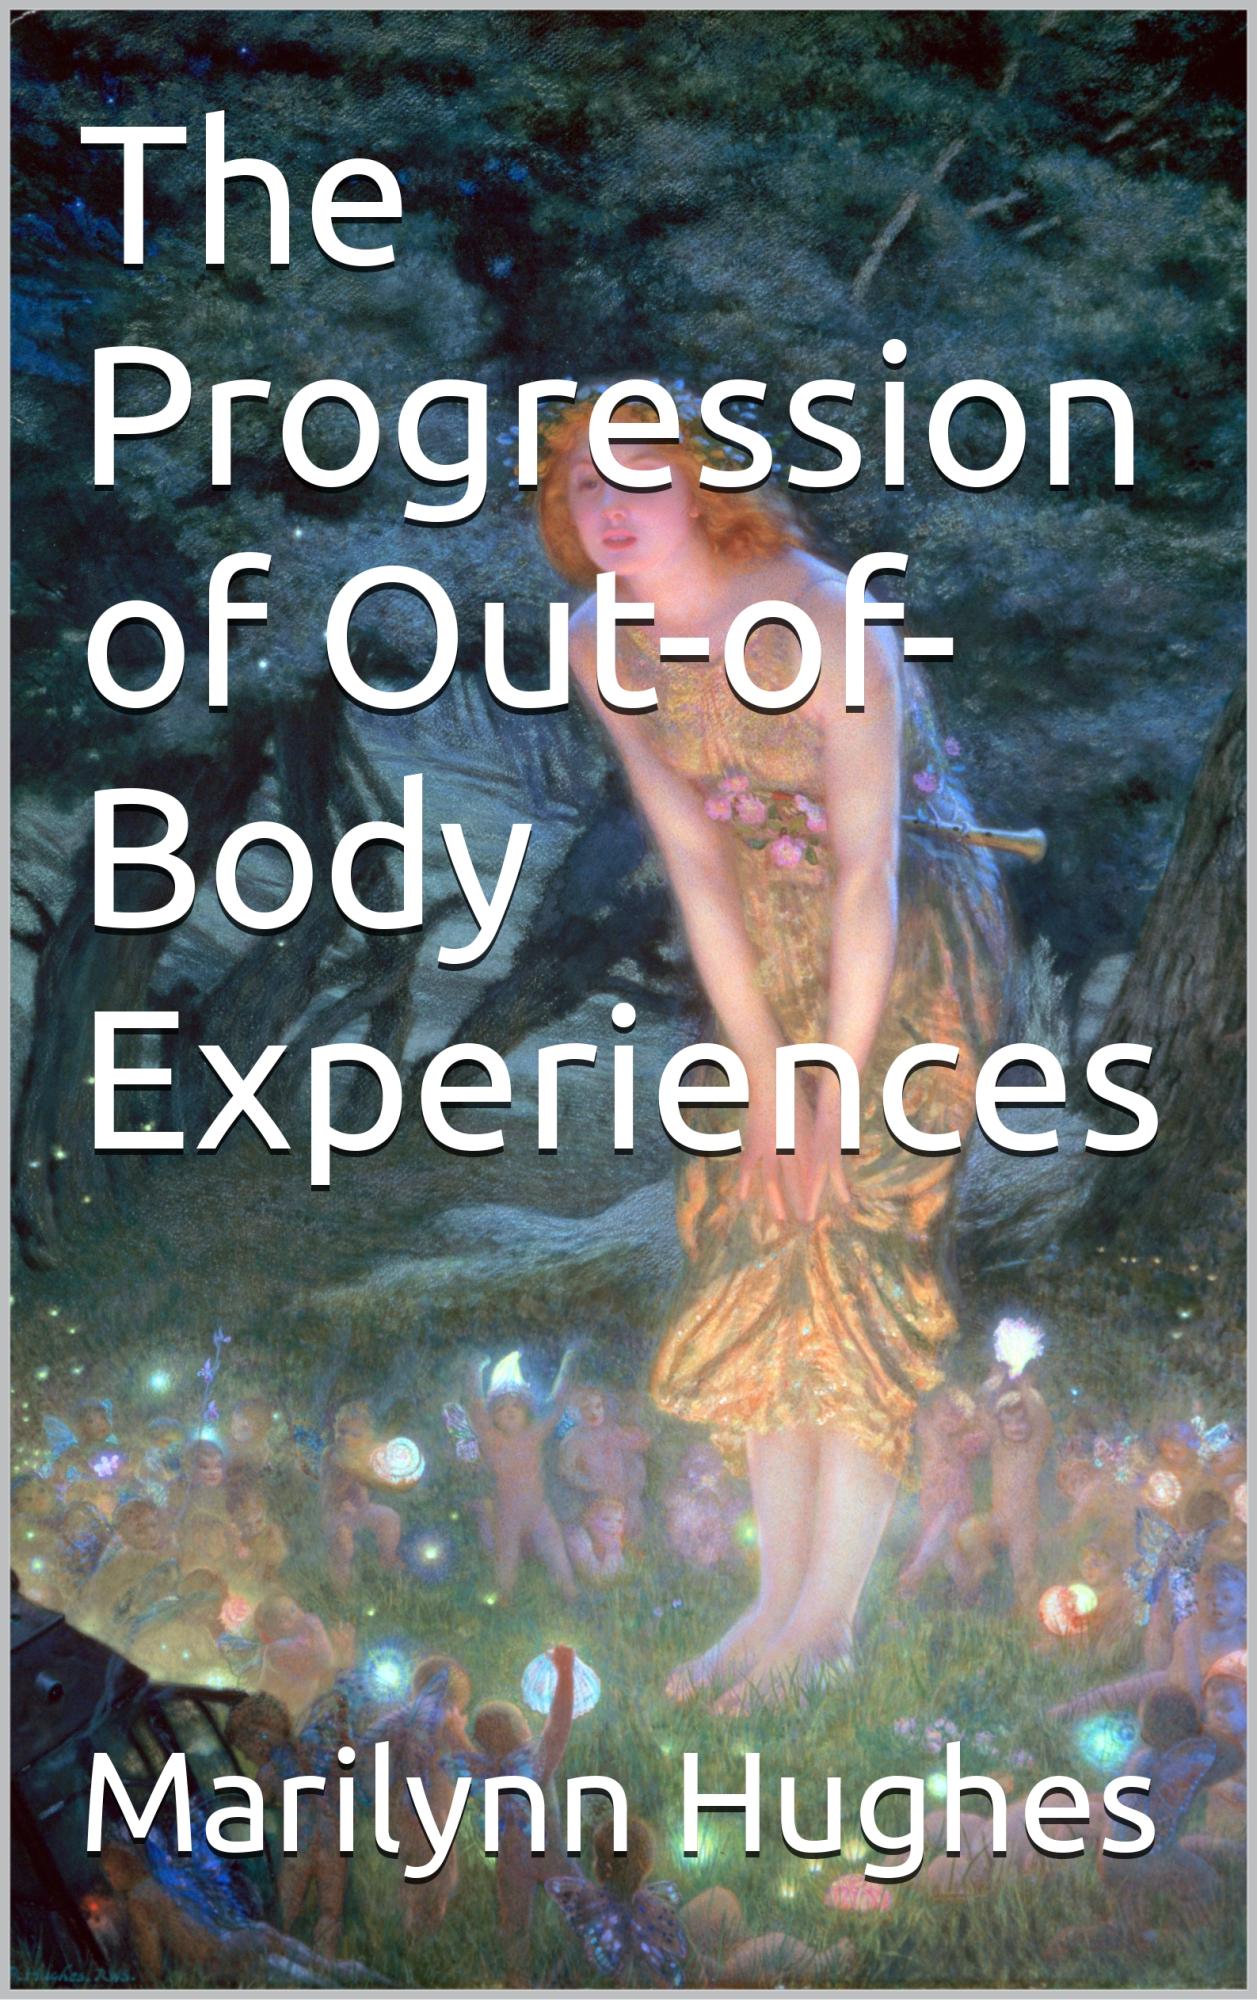 Get a glimpse into the evolutionary nature of how out-of-body experiences progress. -  By Marilynn Hughes